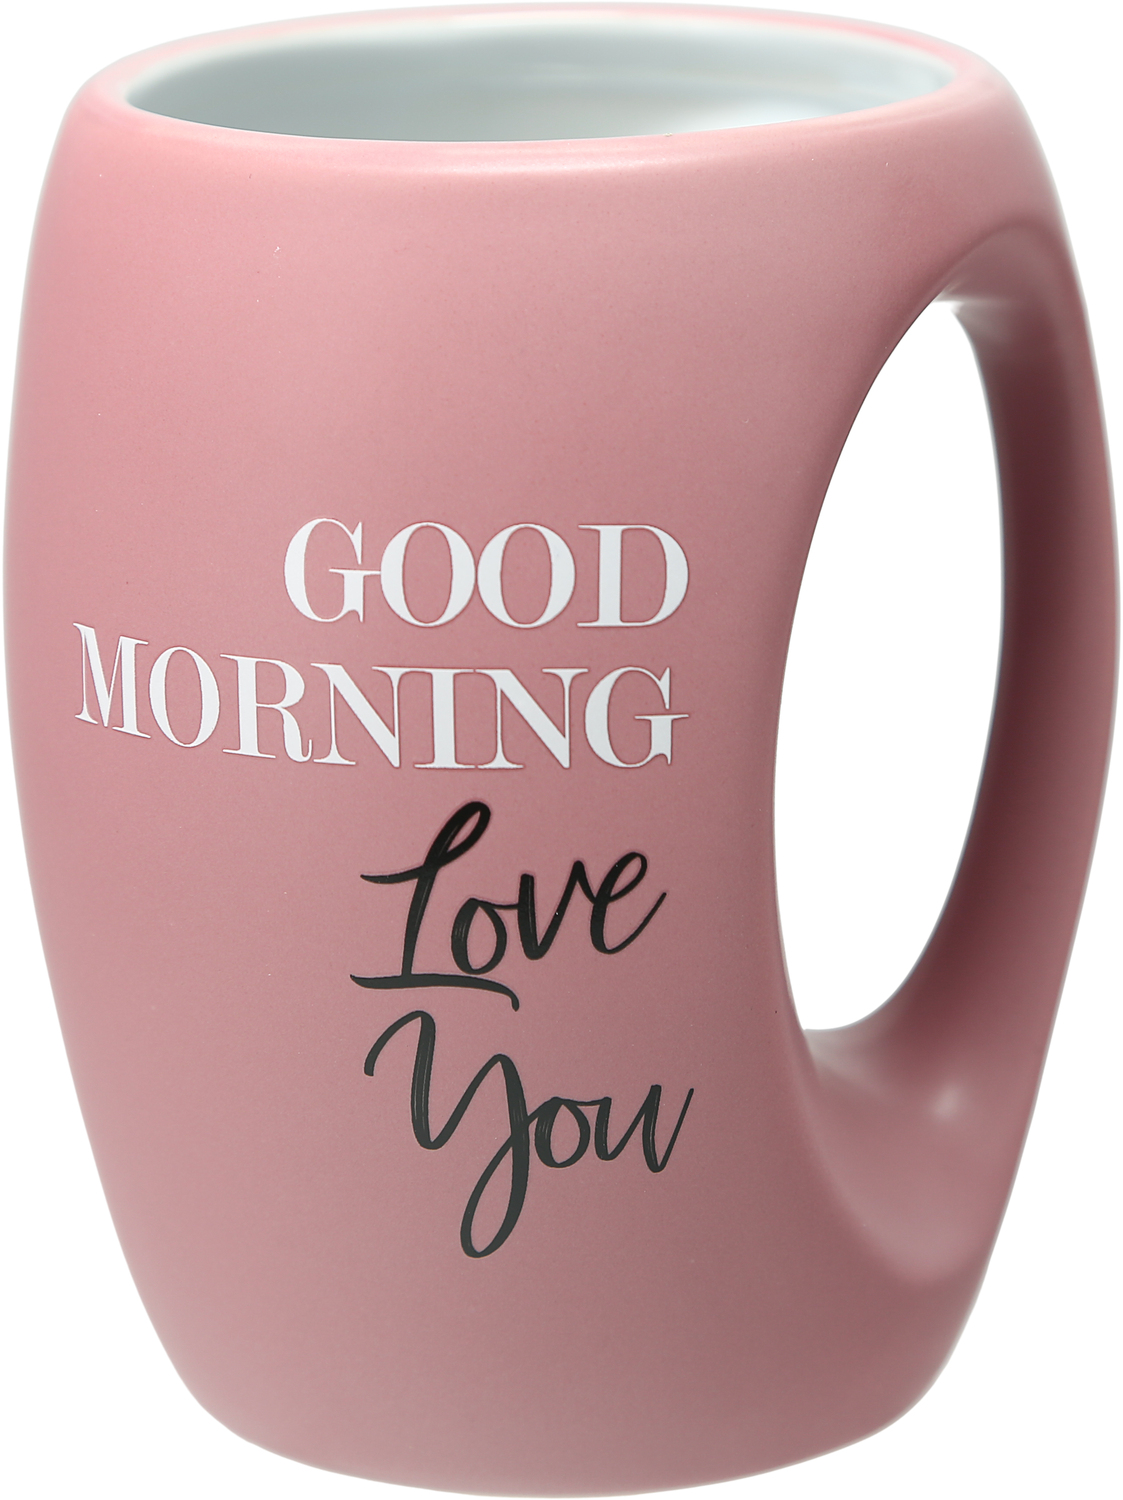 Love You by Good Morning - Love You - 16 oz Cup